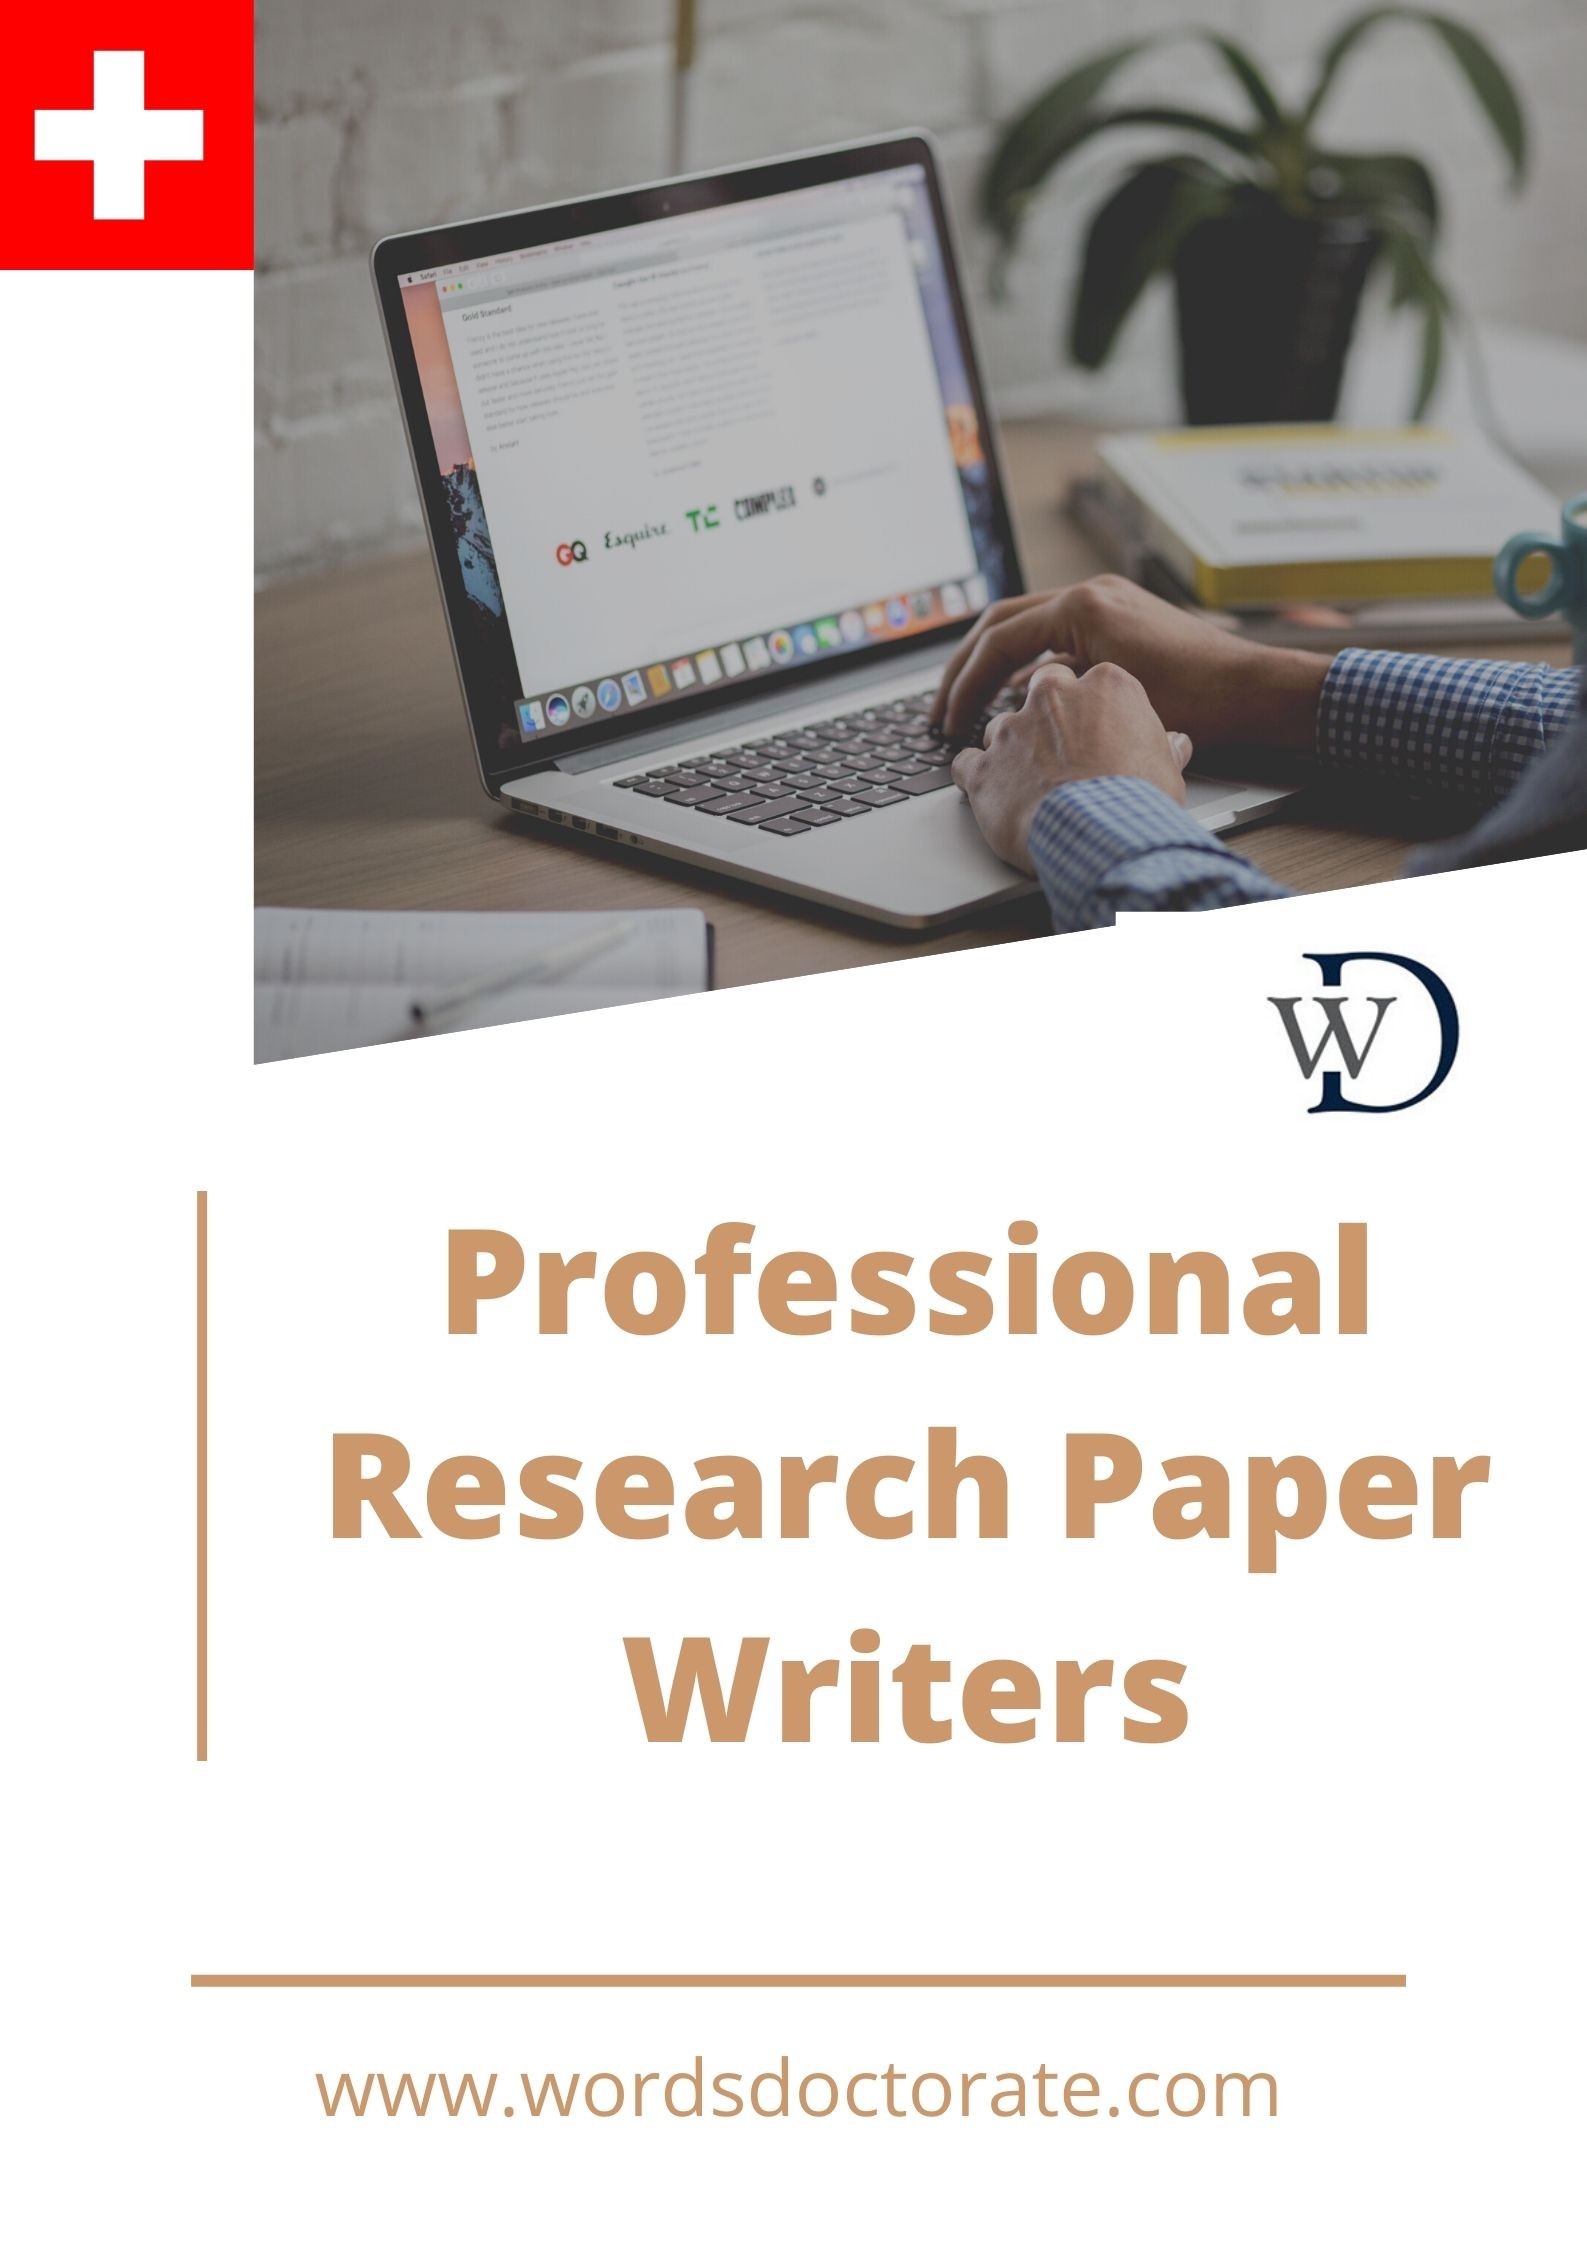  Professional Research Paper Writers